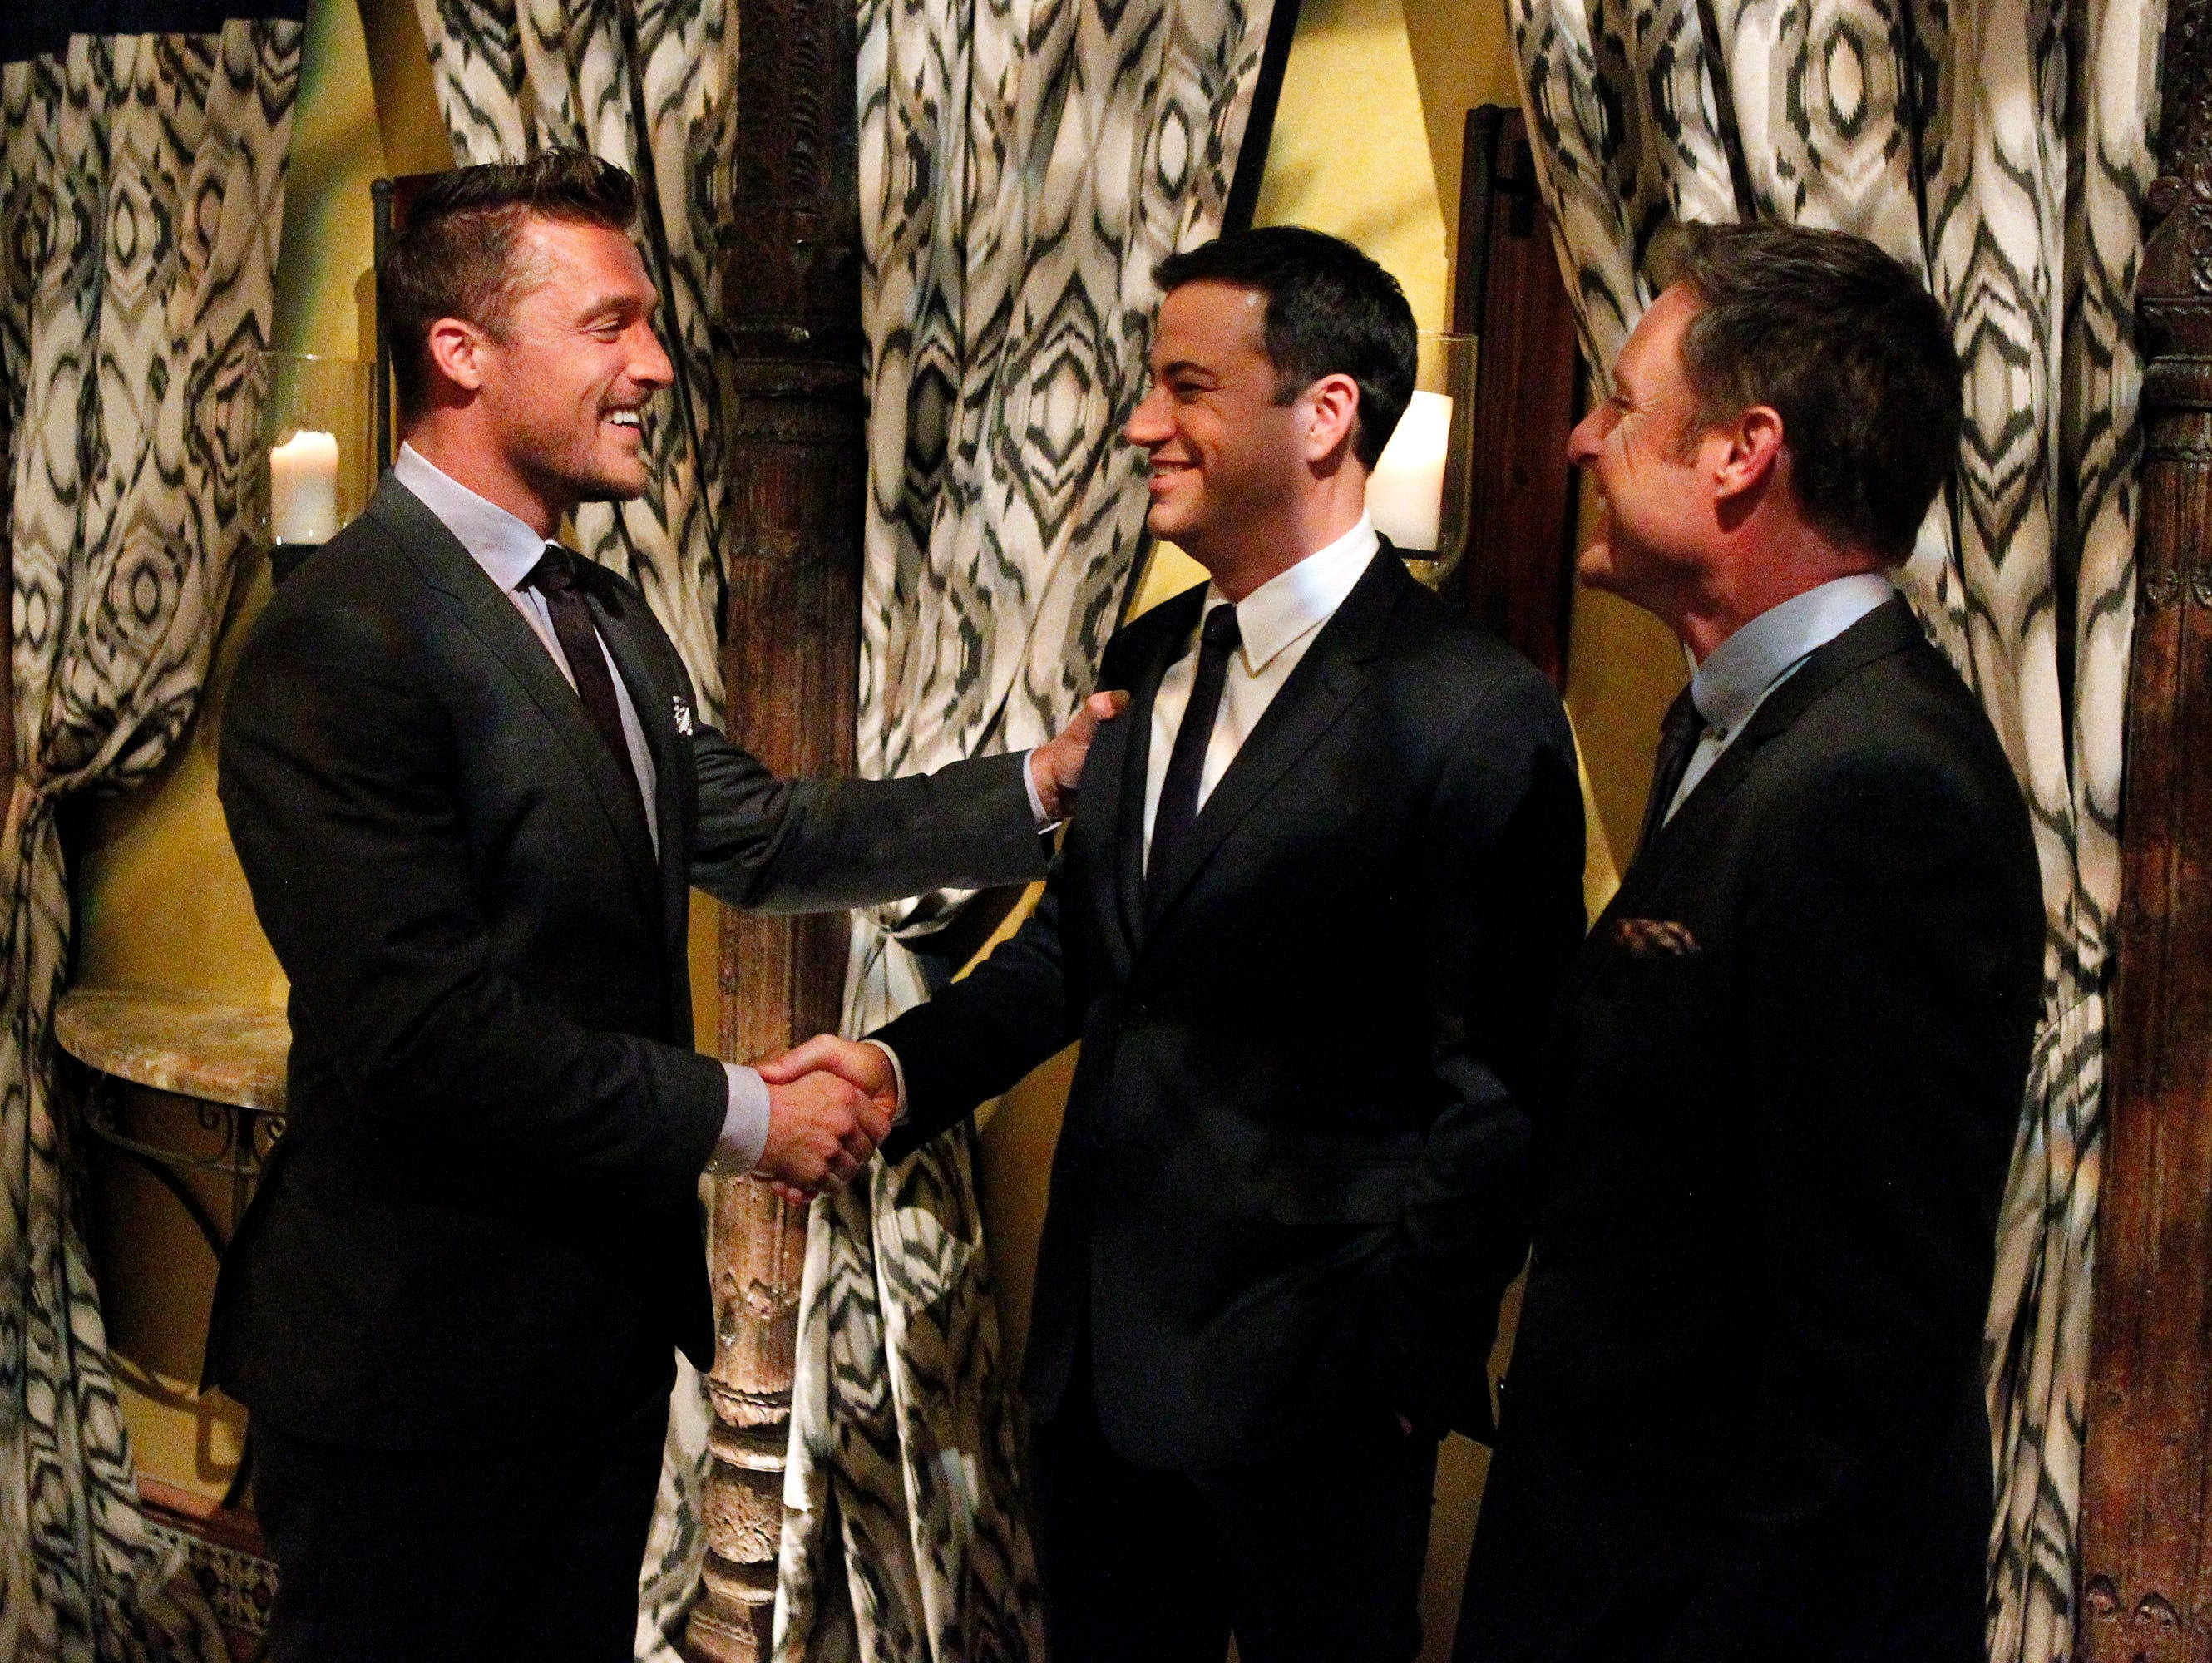 Jimmy Kimmel, center, surprises Bachelor Chris and the 18 remaining women by taking over the show as guest host for this episode in a scene from the television program 